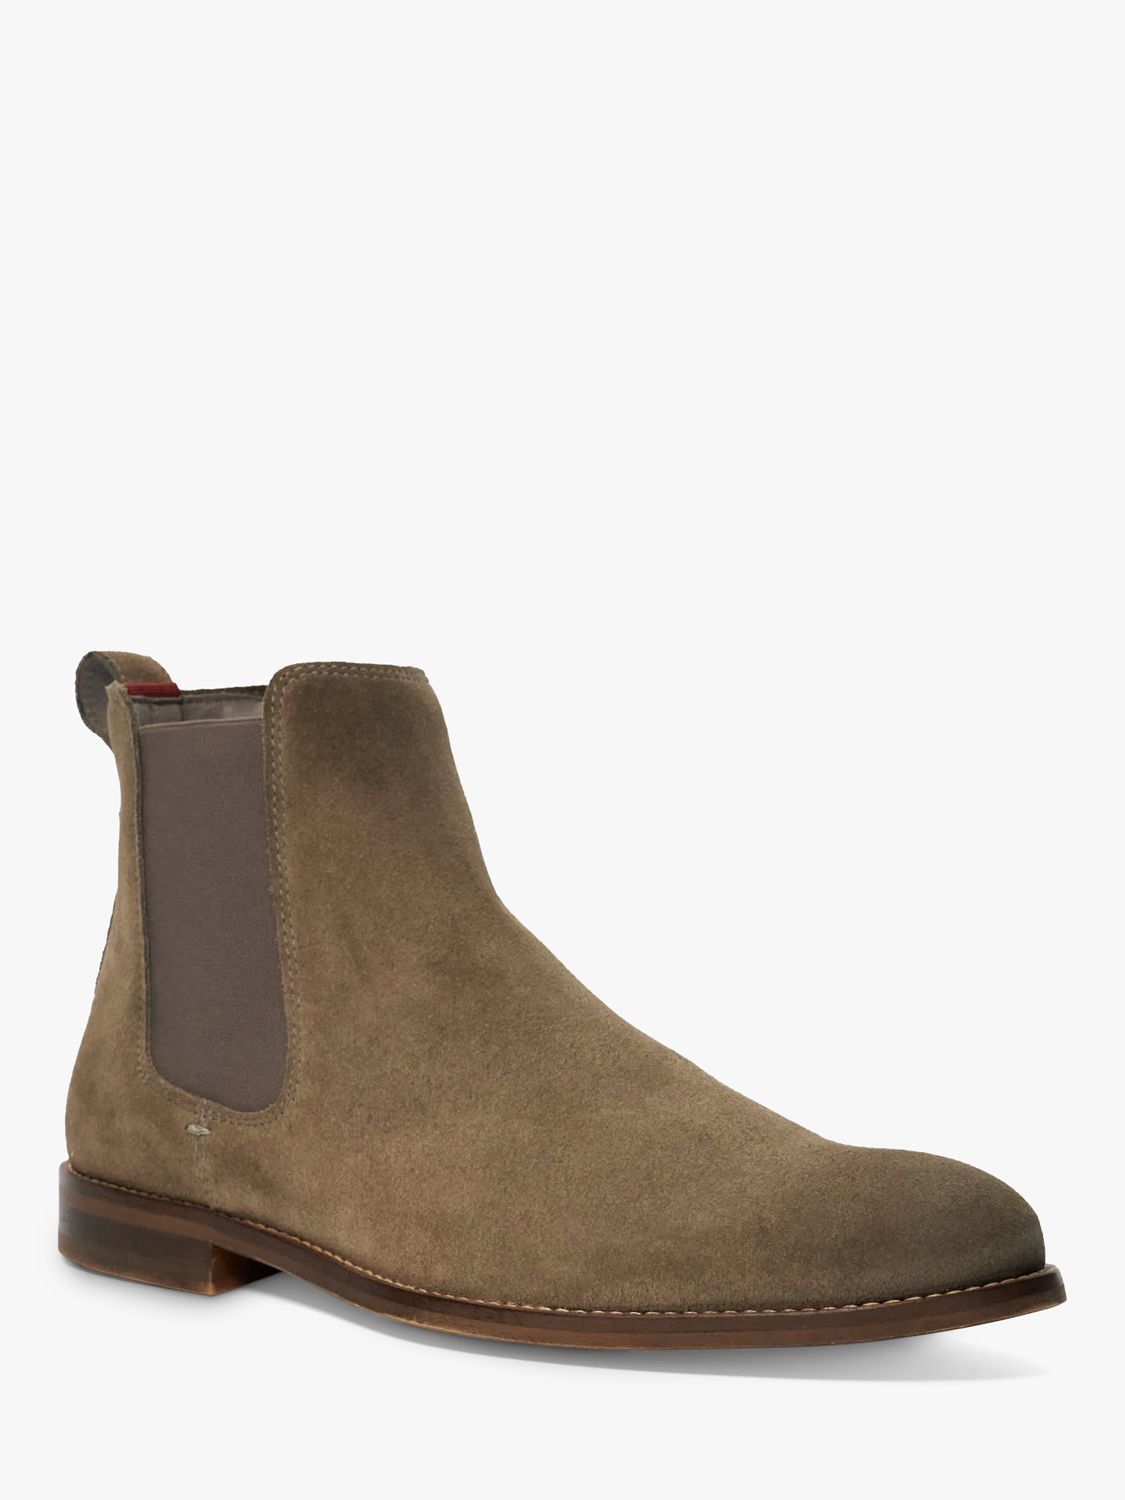 Dune Collective Suede Chelsea Boots, Taupe, 11